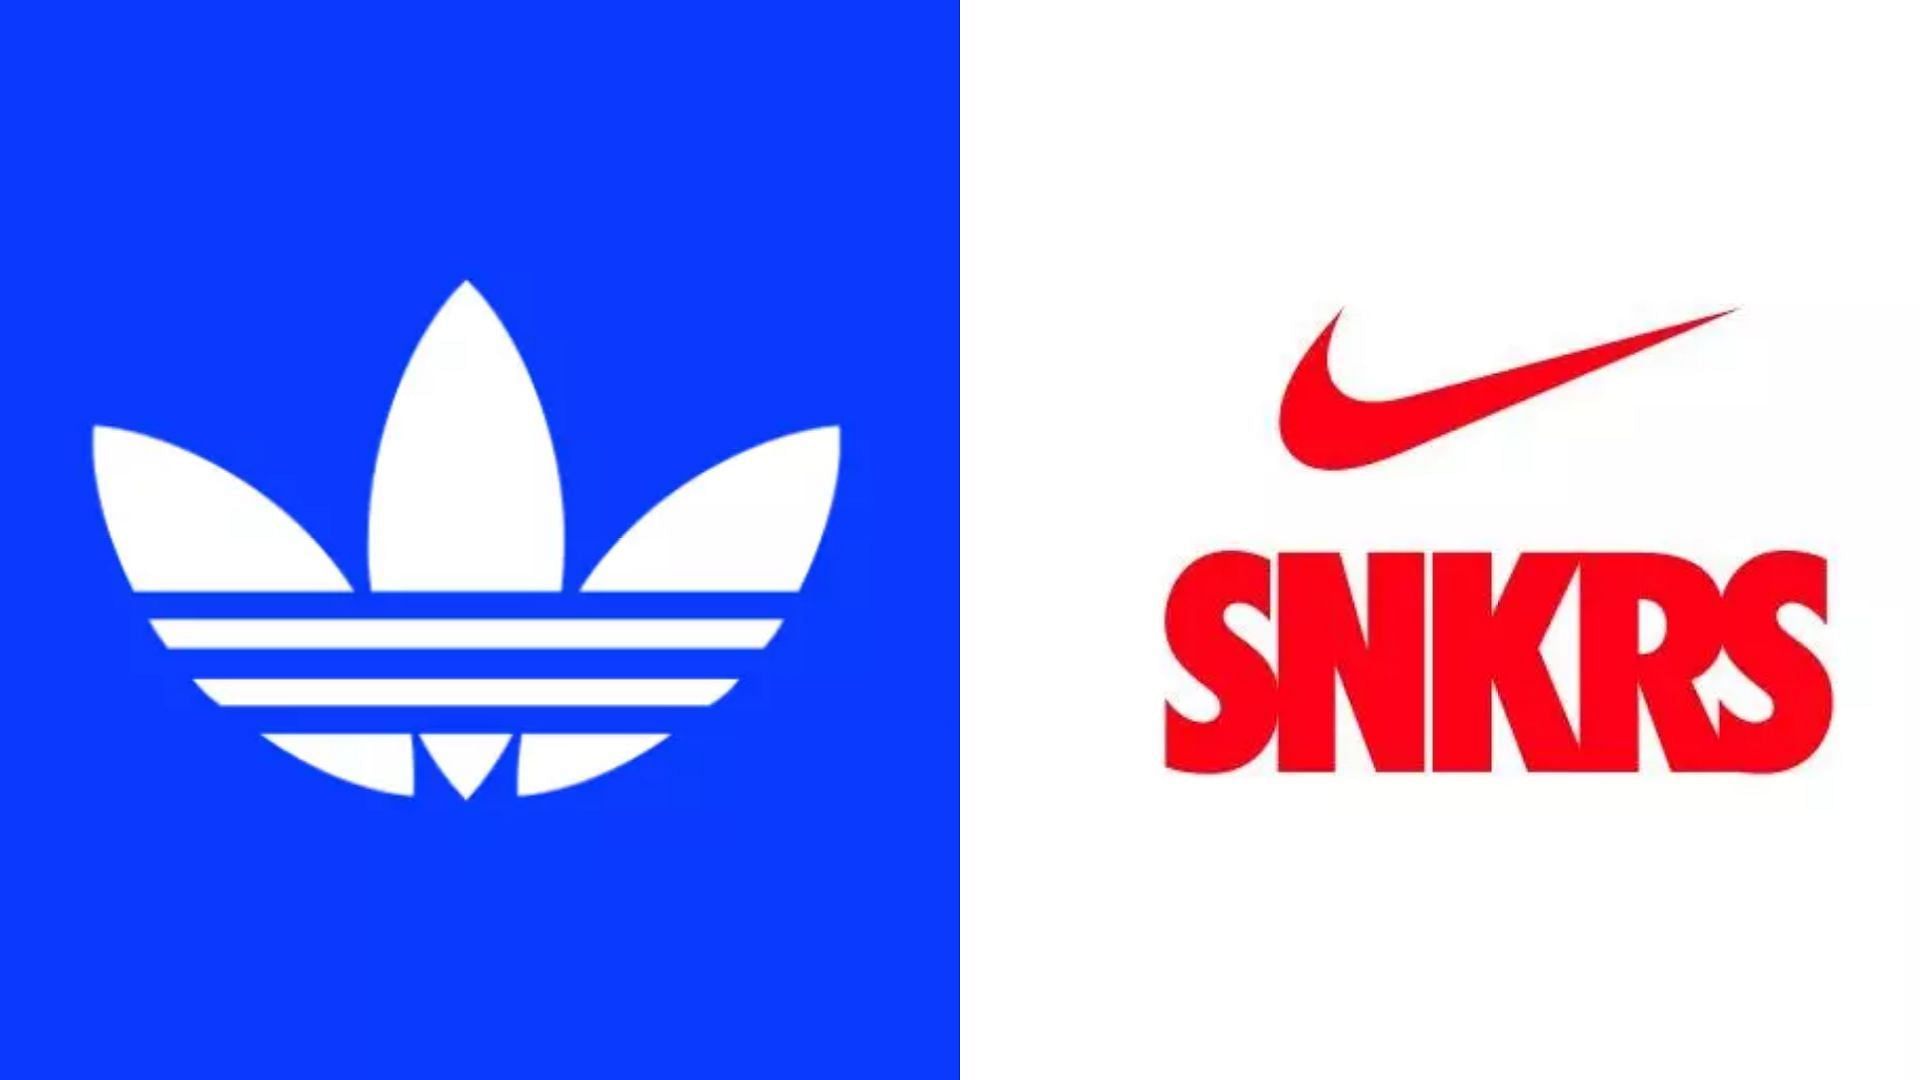 melón Disminución fotografía Explained: Everything to know about the Nike x Adidas lawsuit drama